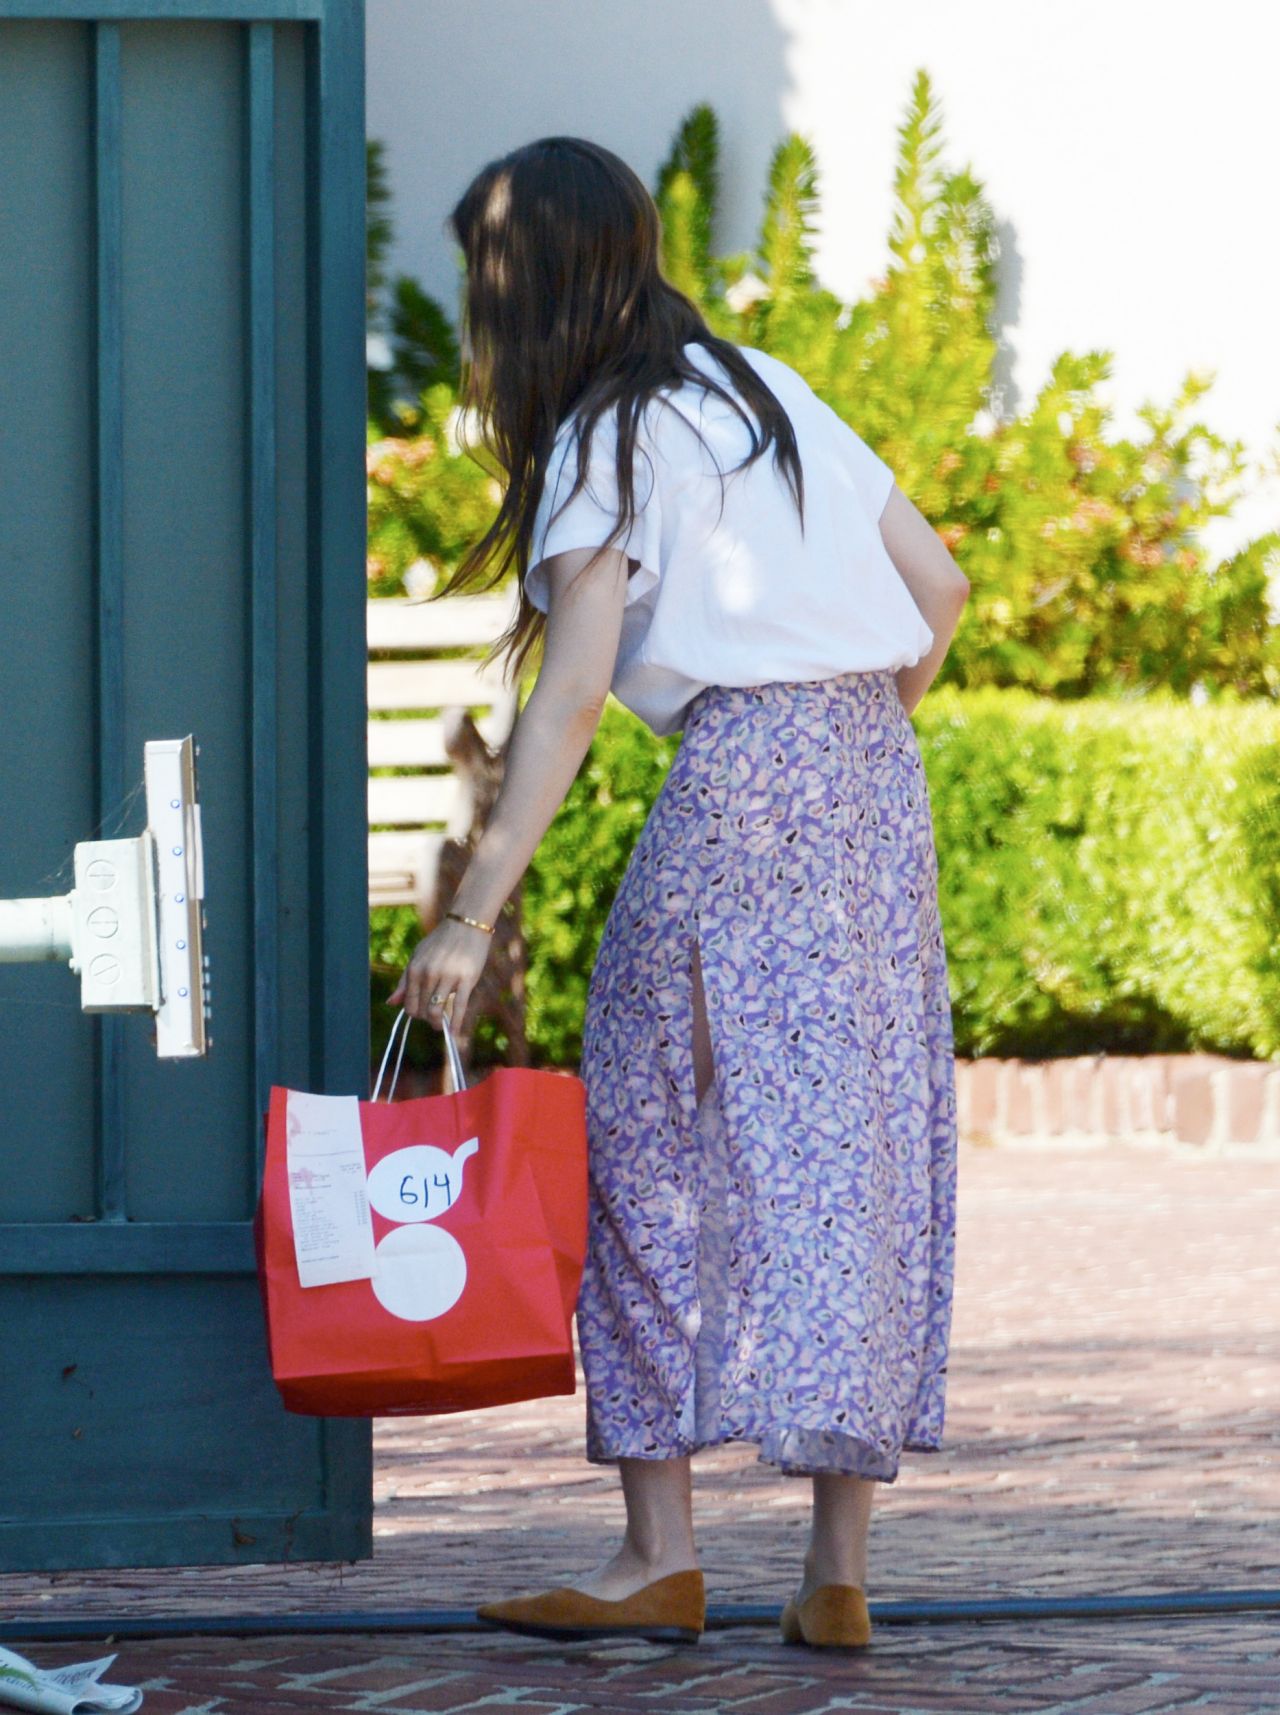 lily-collins-out-for-a-morning-stroll-in-beverly-hills-10-06-2020-7.jpg